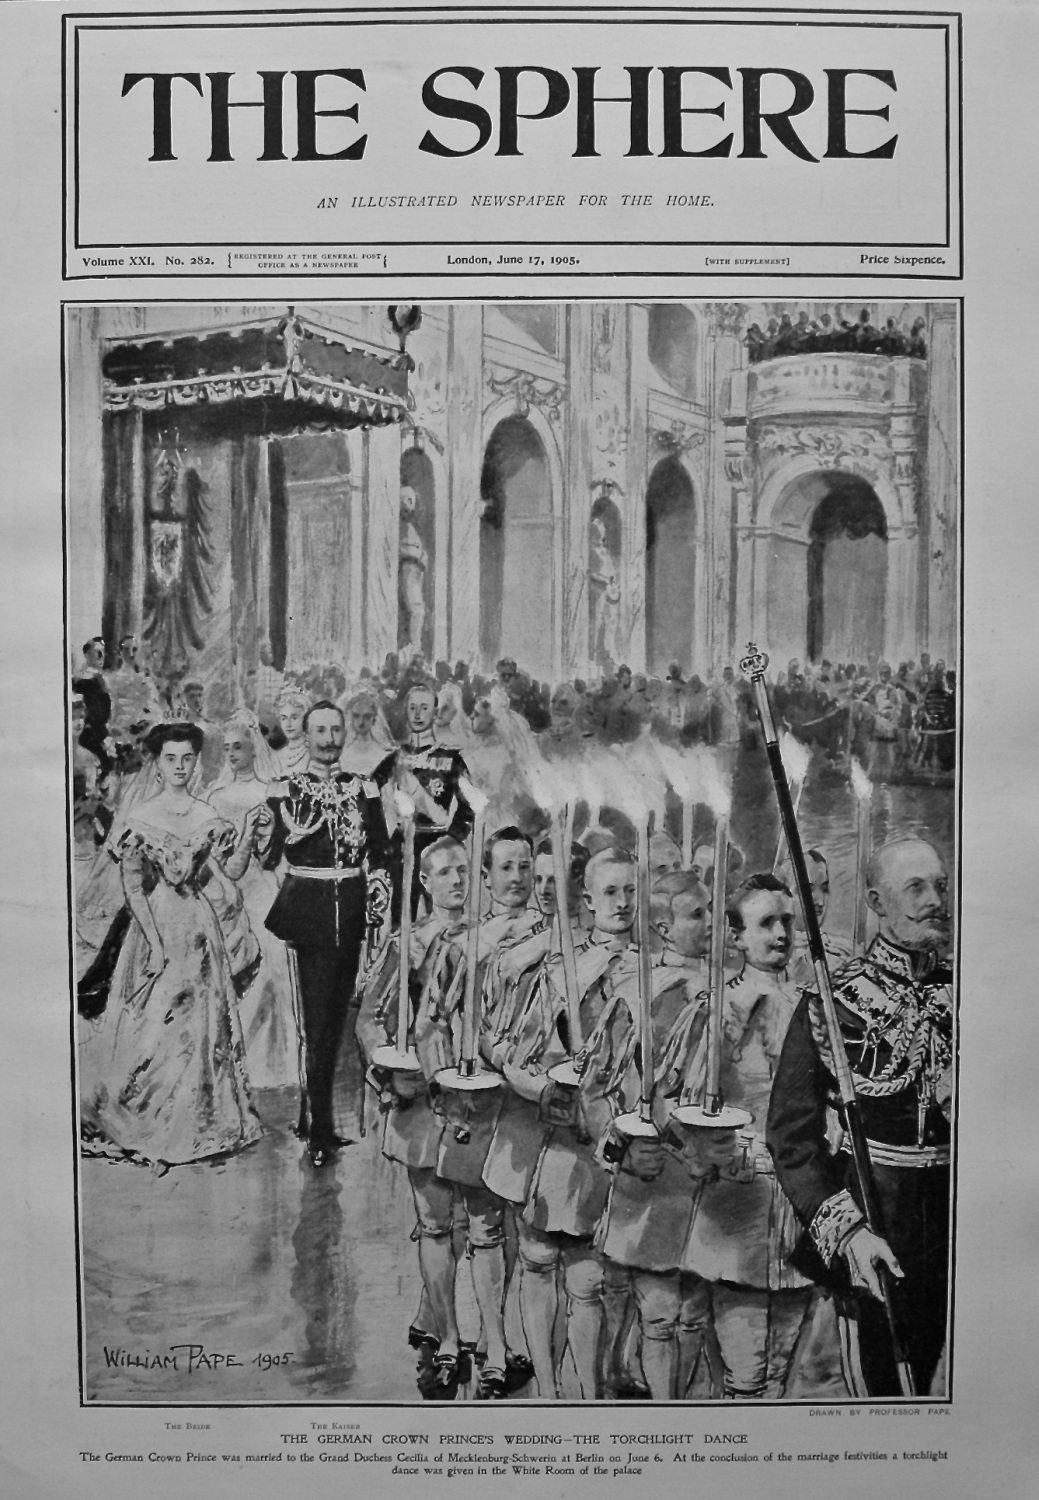 The German Crown Prince's Wedding - The Torchlight Dance. 1905.